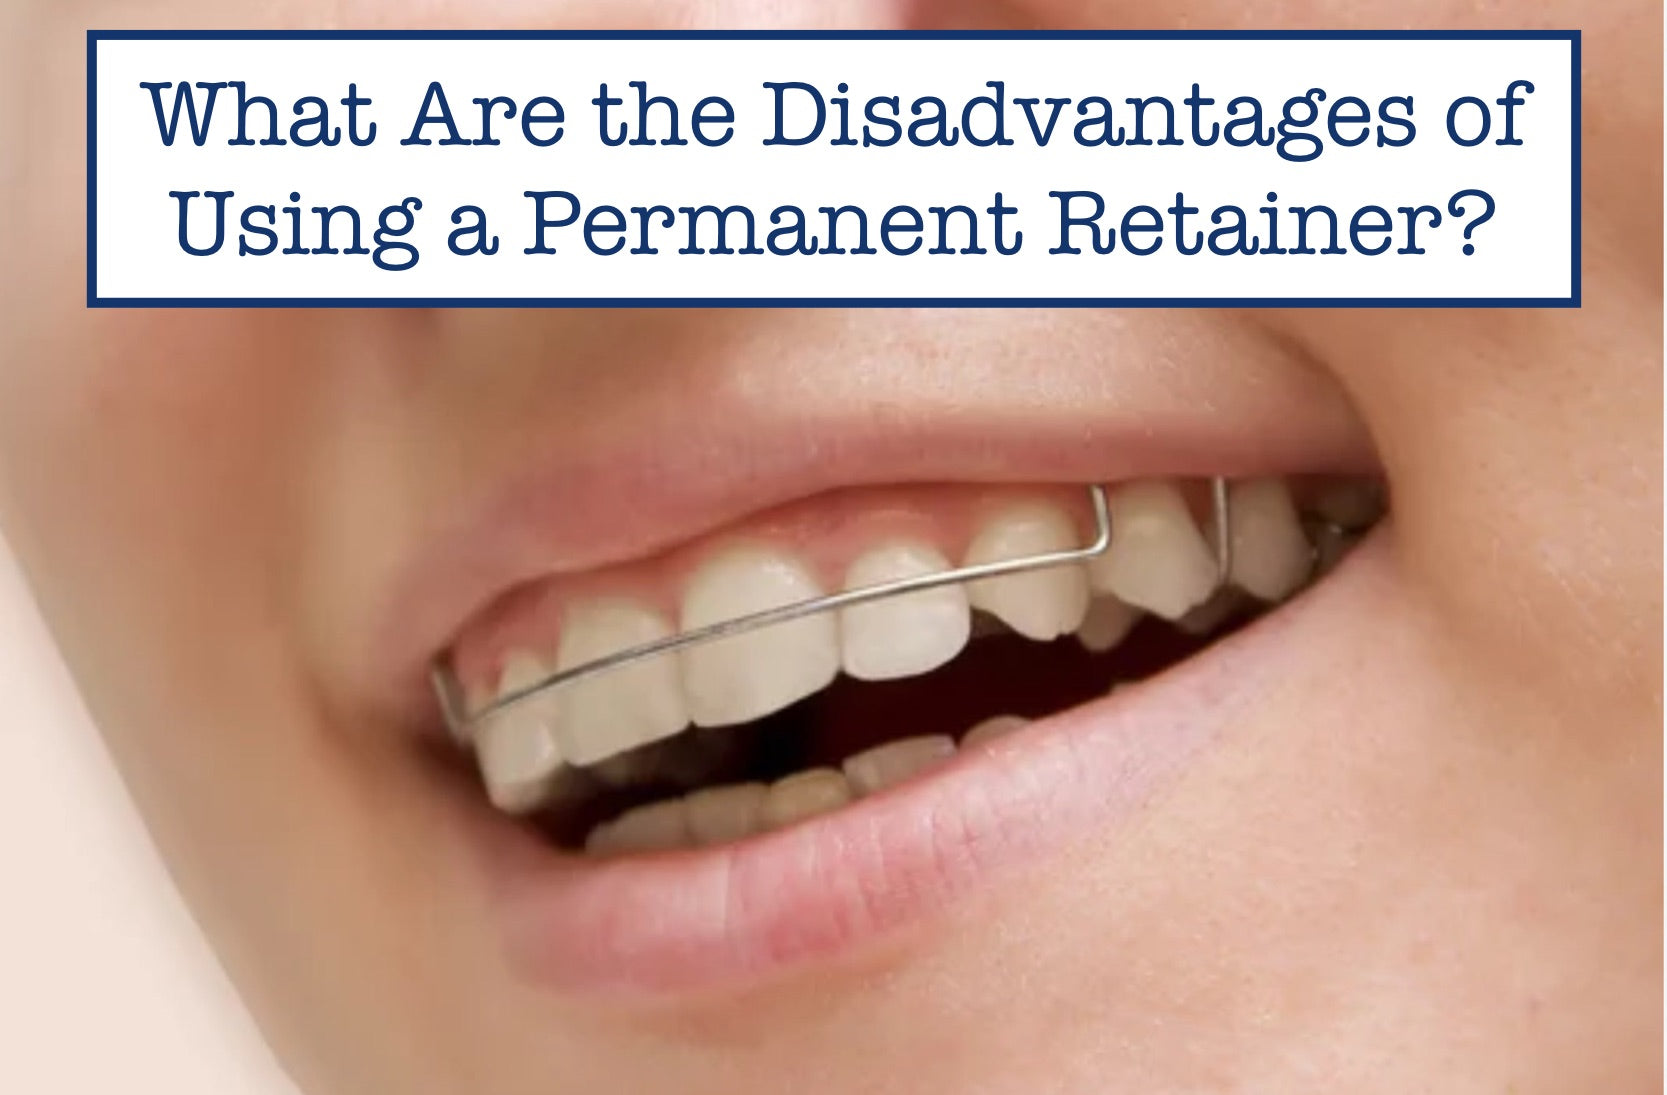 What Are the Disadvantages of Using a Permanent Retainer?